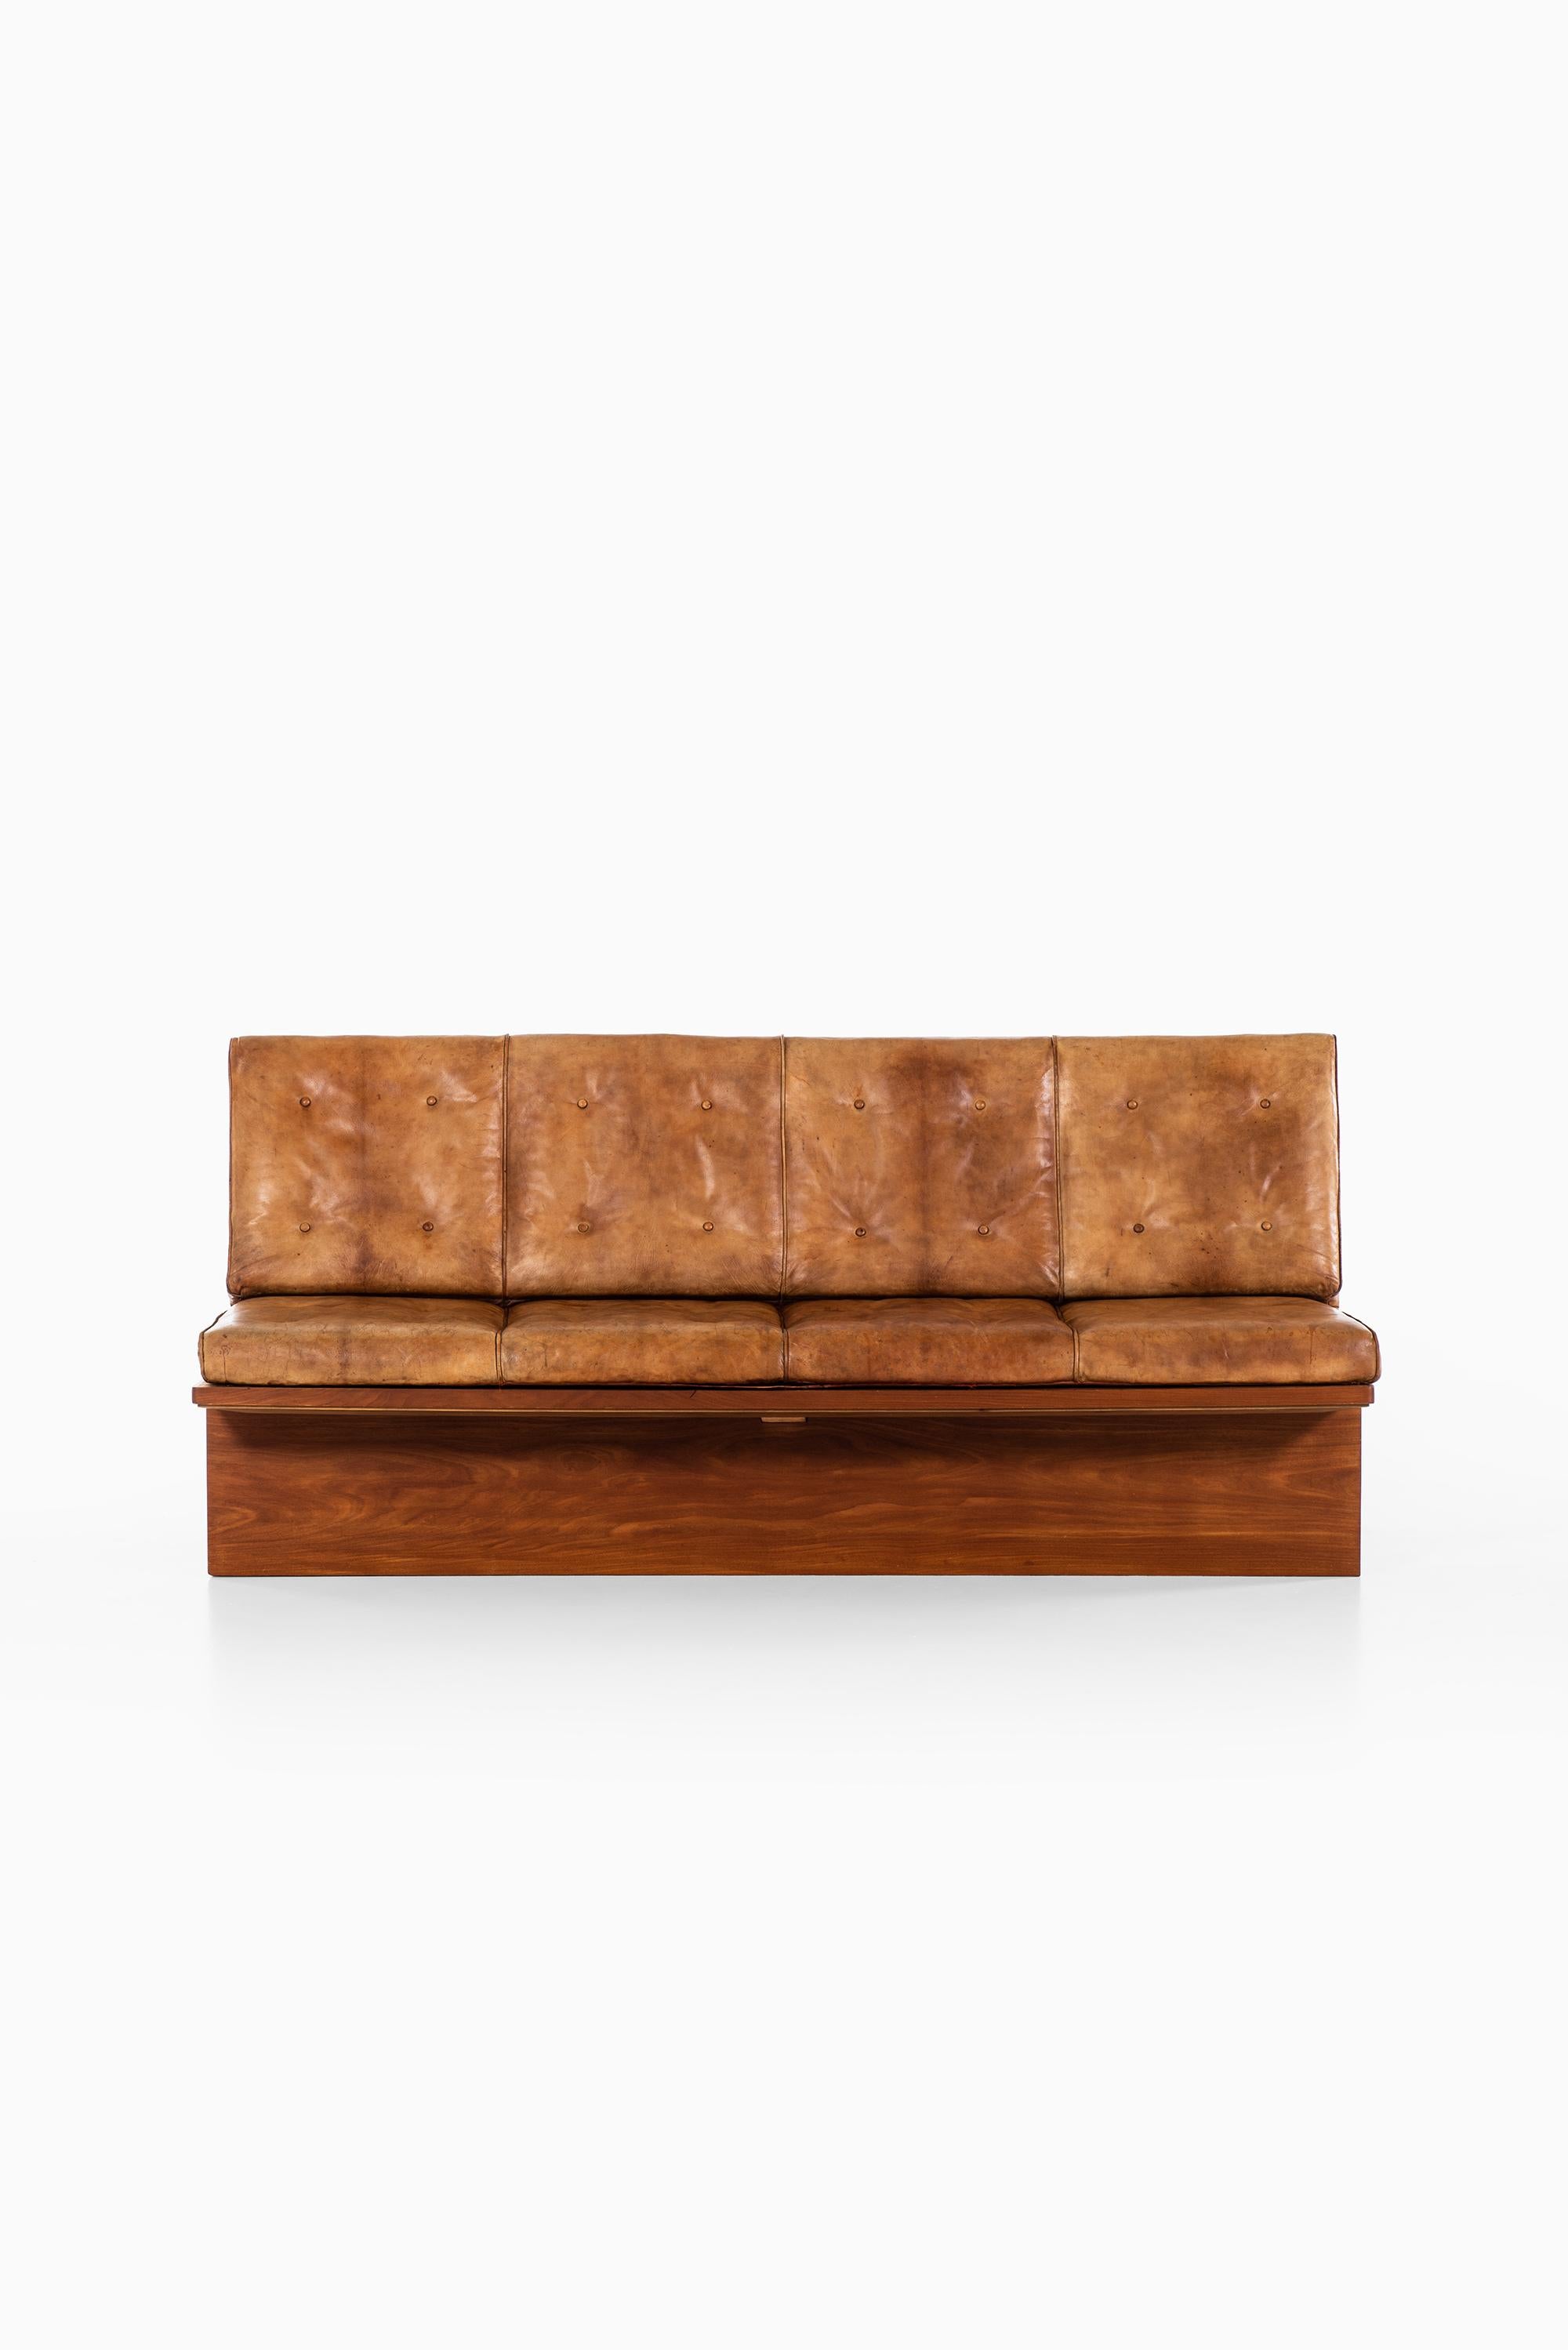 Unique hallway sofa designed by Ole Wanscher. Produced by cabinetmaker A.J. Iversen in Denmark. Provenance: Ole Wanscher, thence by descent to his son, Mr. Henrik Wanscher.